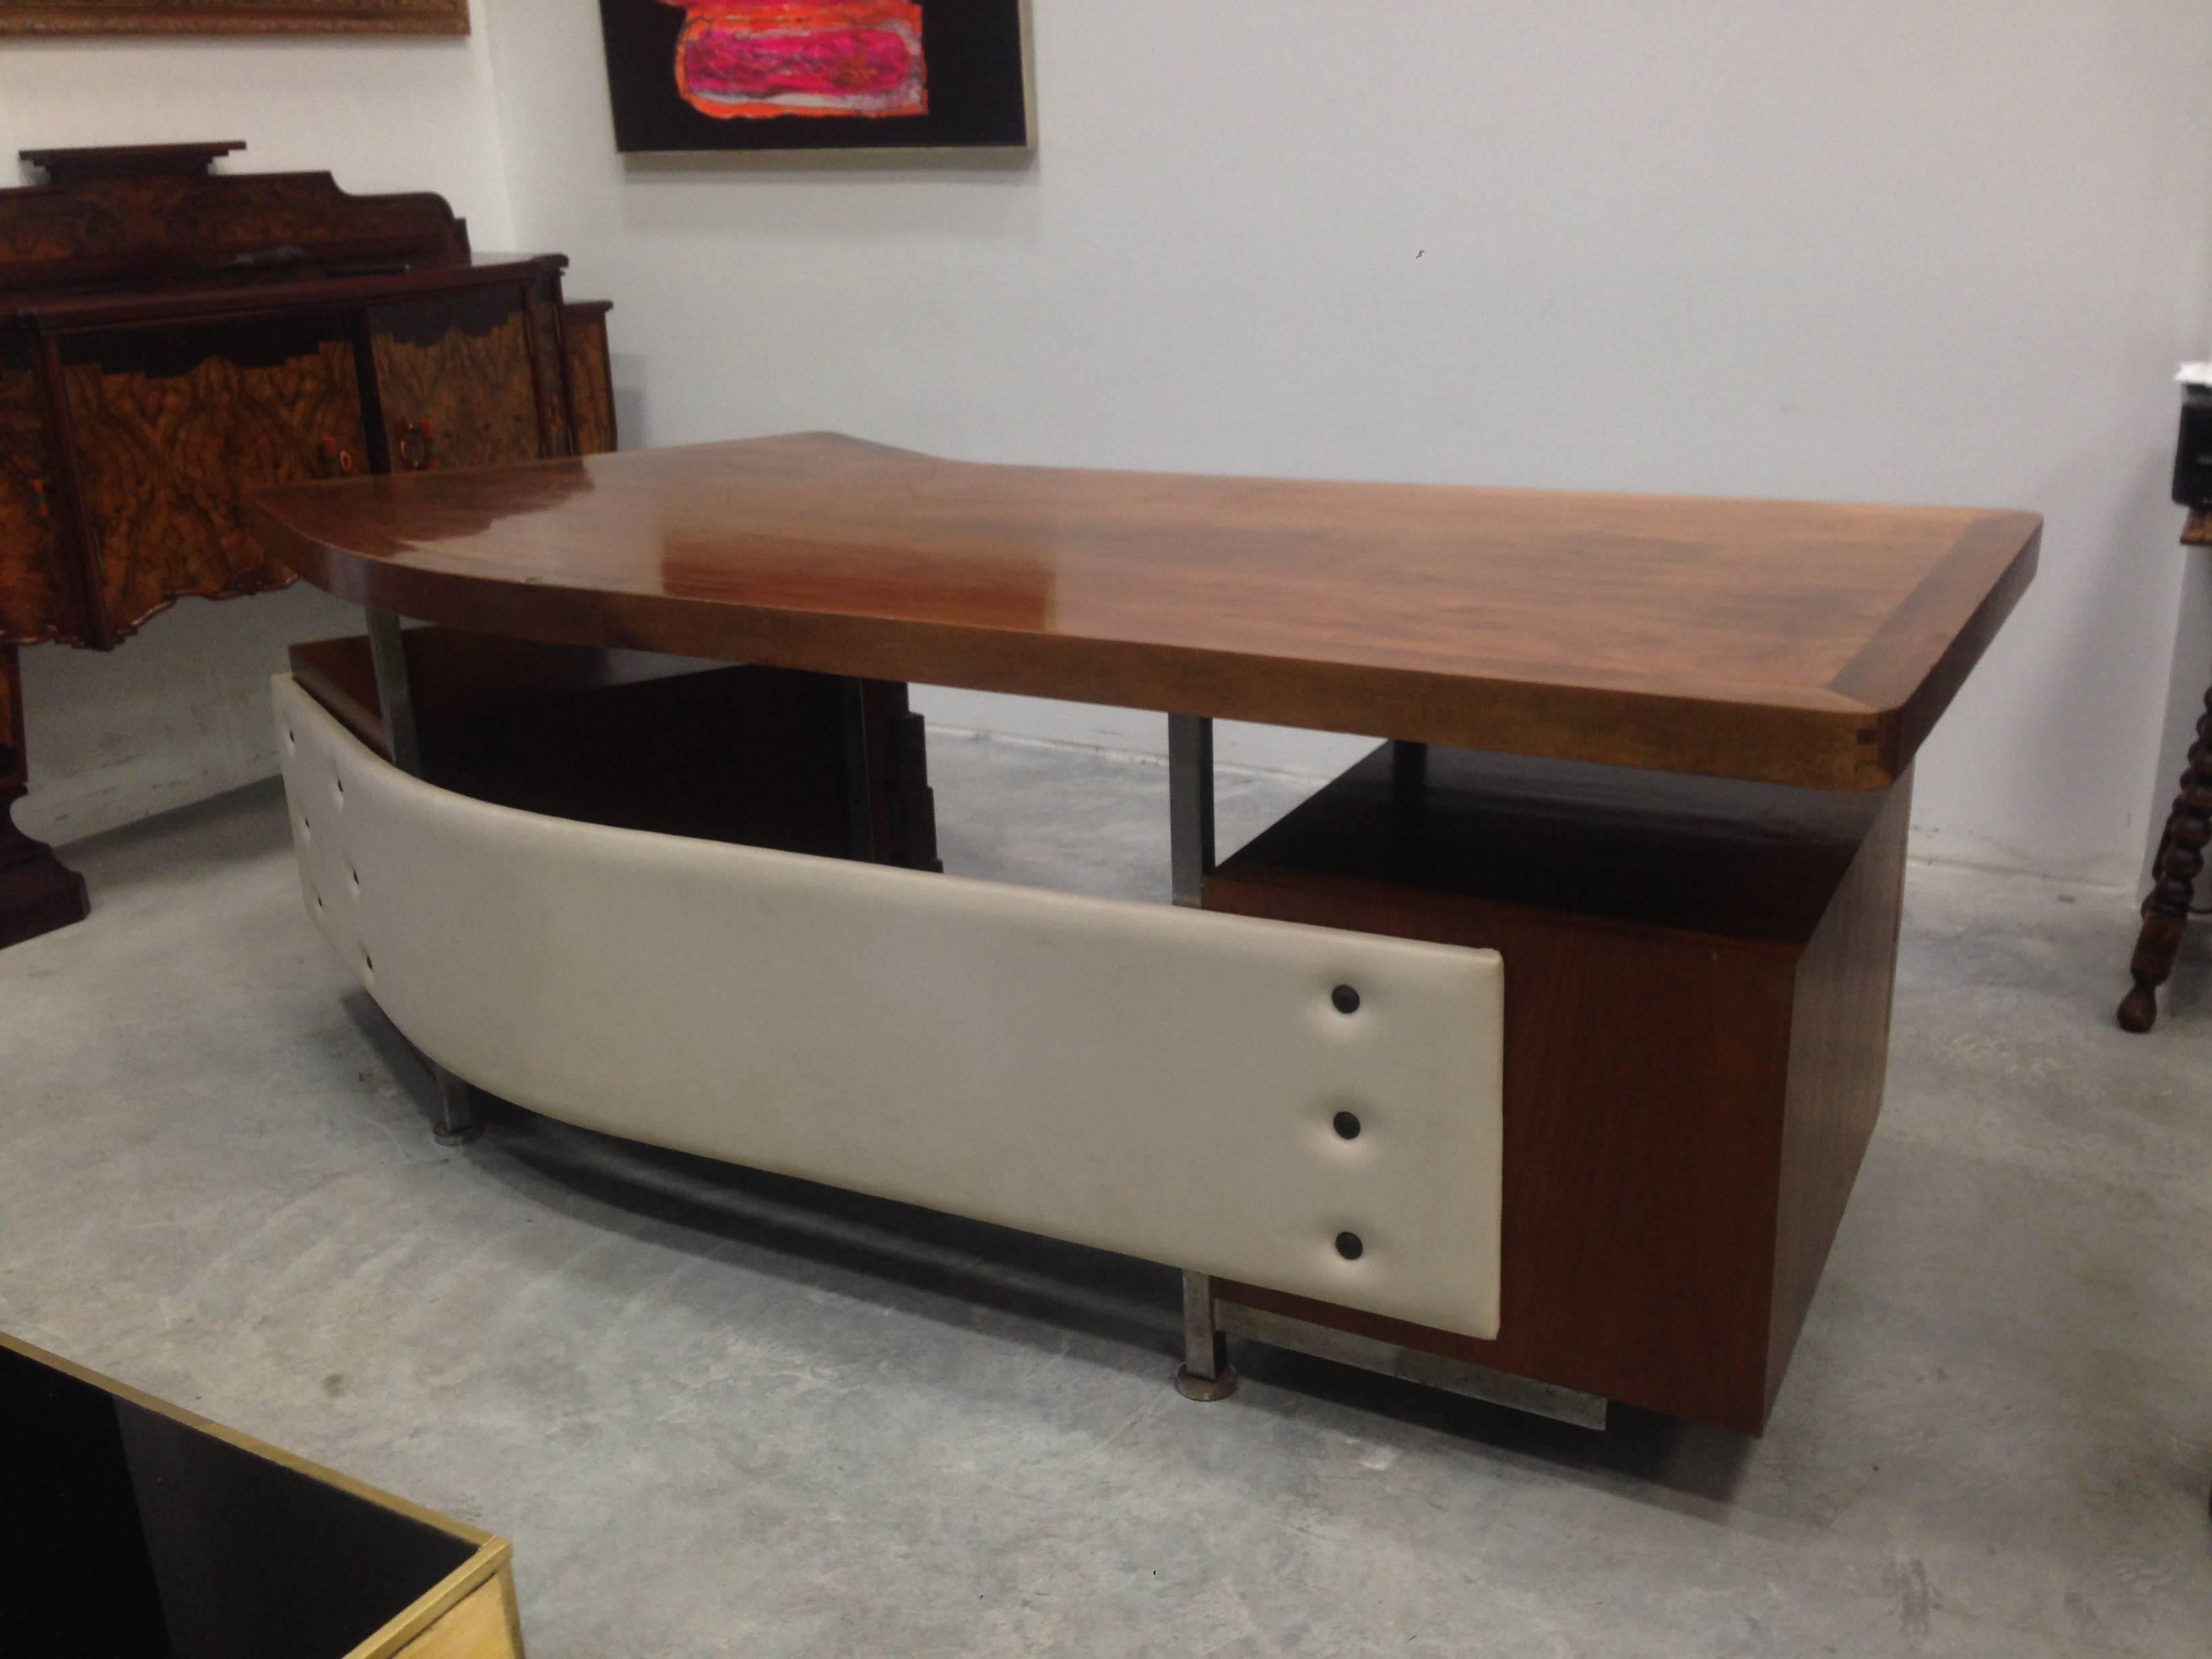 Spectacular Mid-Century desk.
Rare form on its top.
Four drawers on each side.